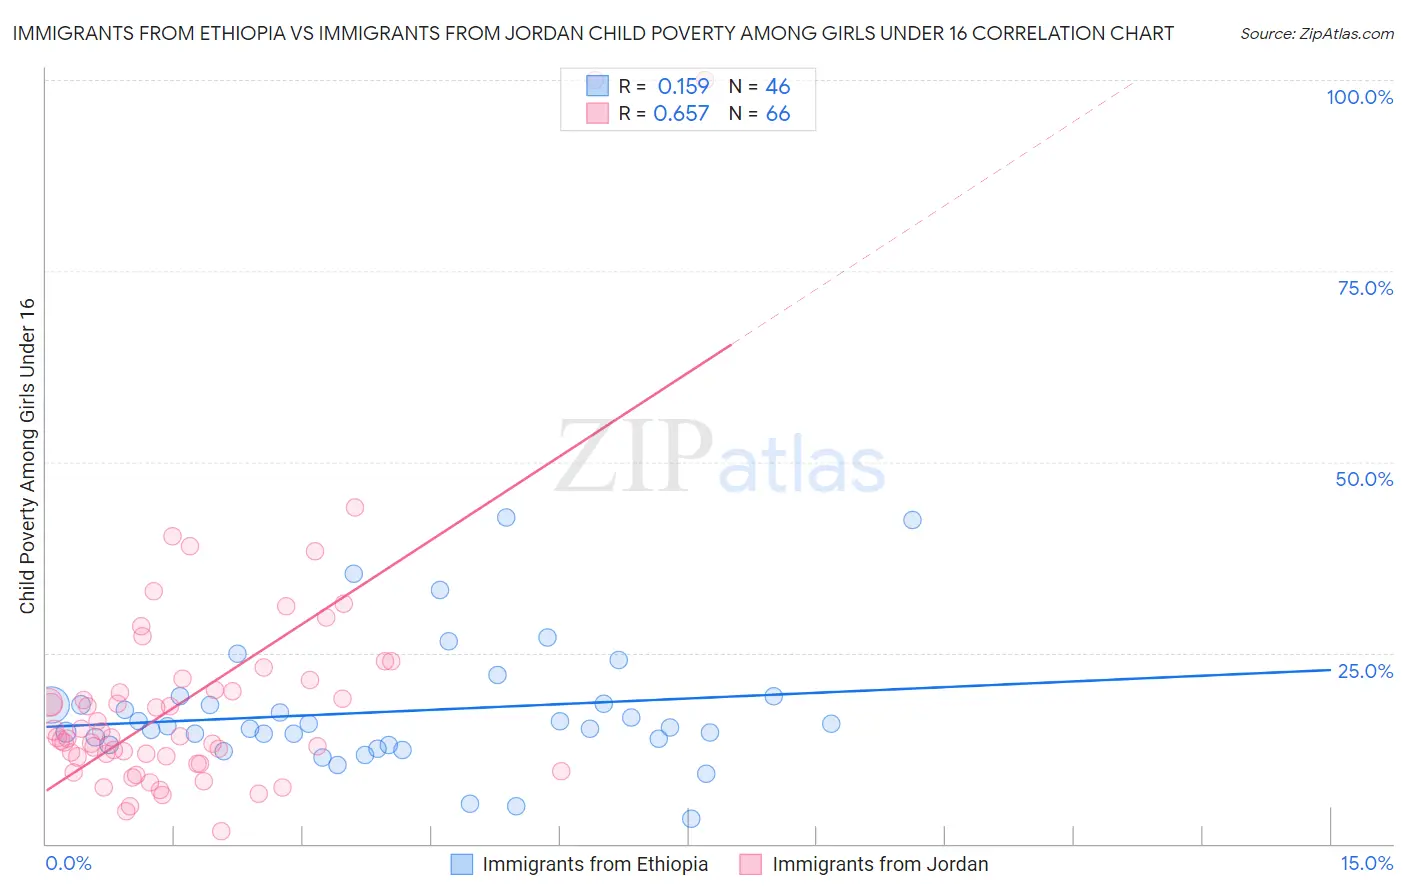 Immigrants from Ethiopia vs Immigrants from Jordan Child Poverty Among Girls Under 16